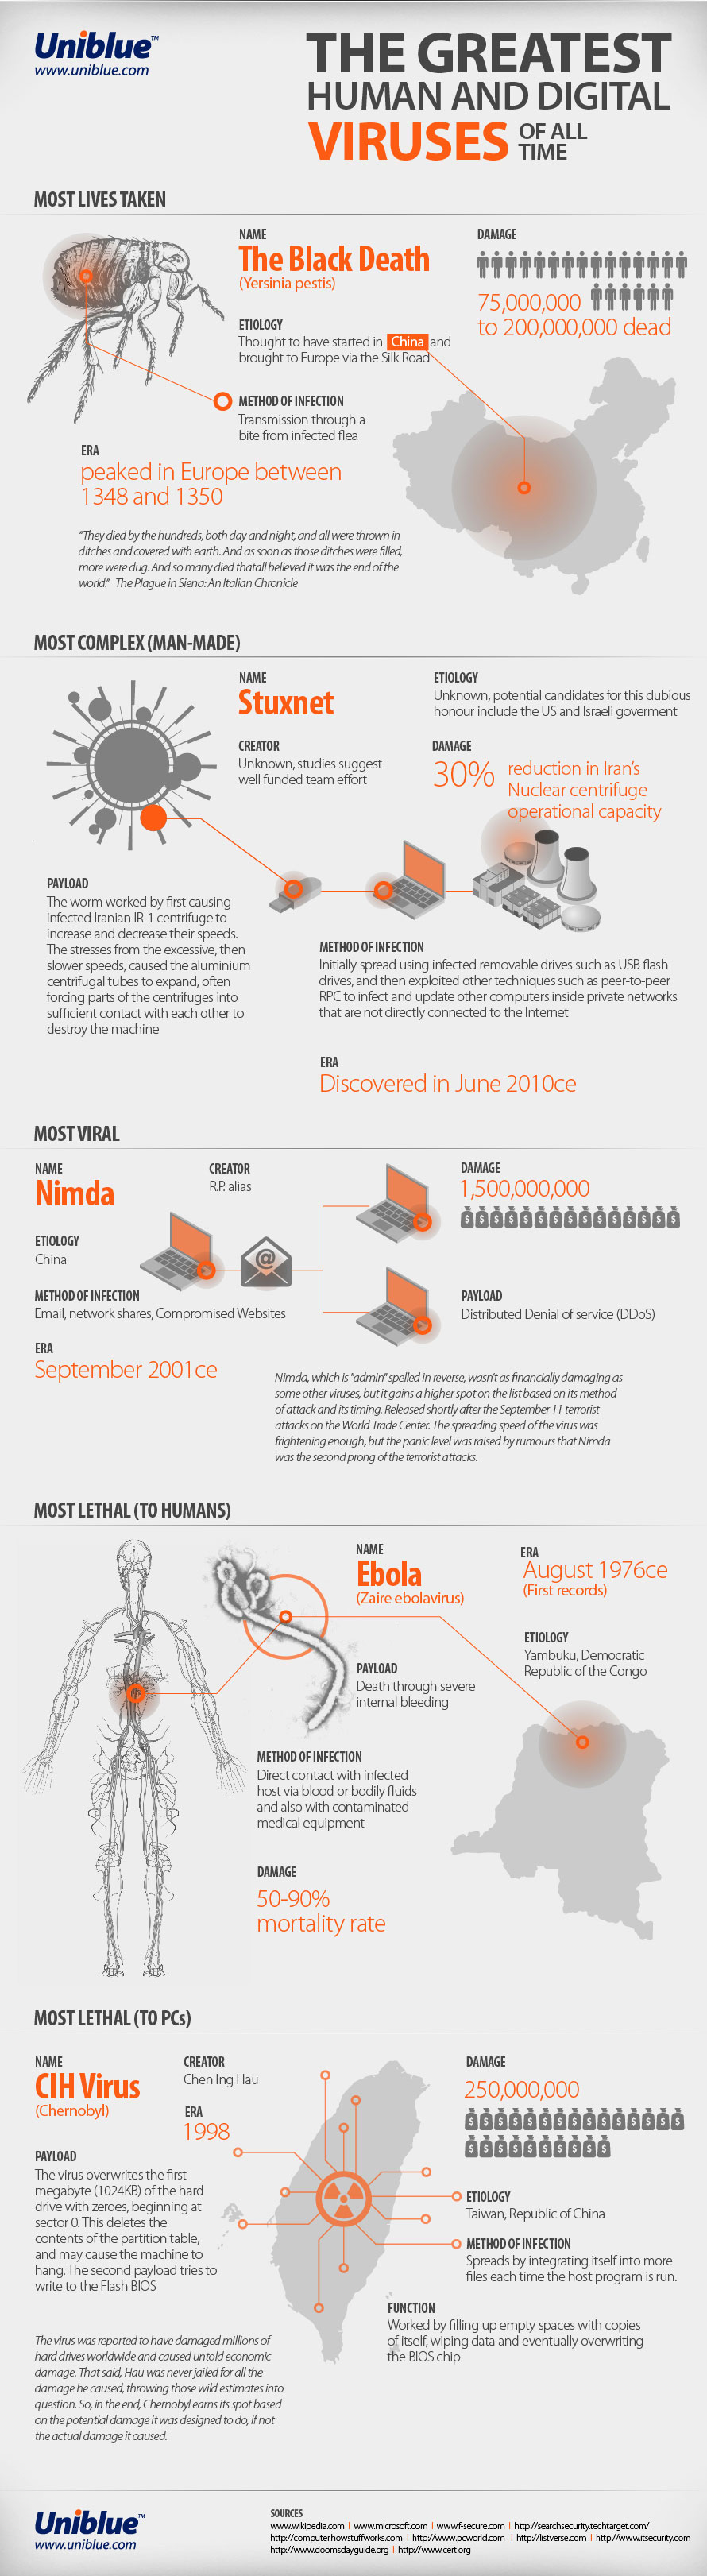 InfoGraphic on the Greatest Human and Digital Viruses,